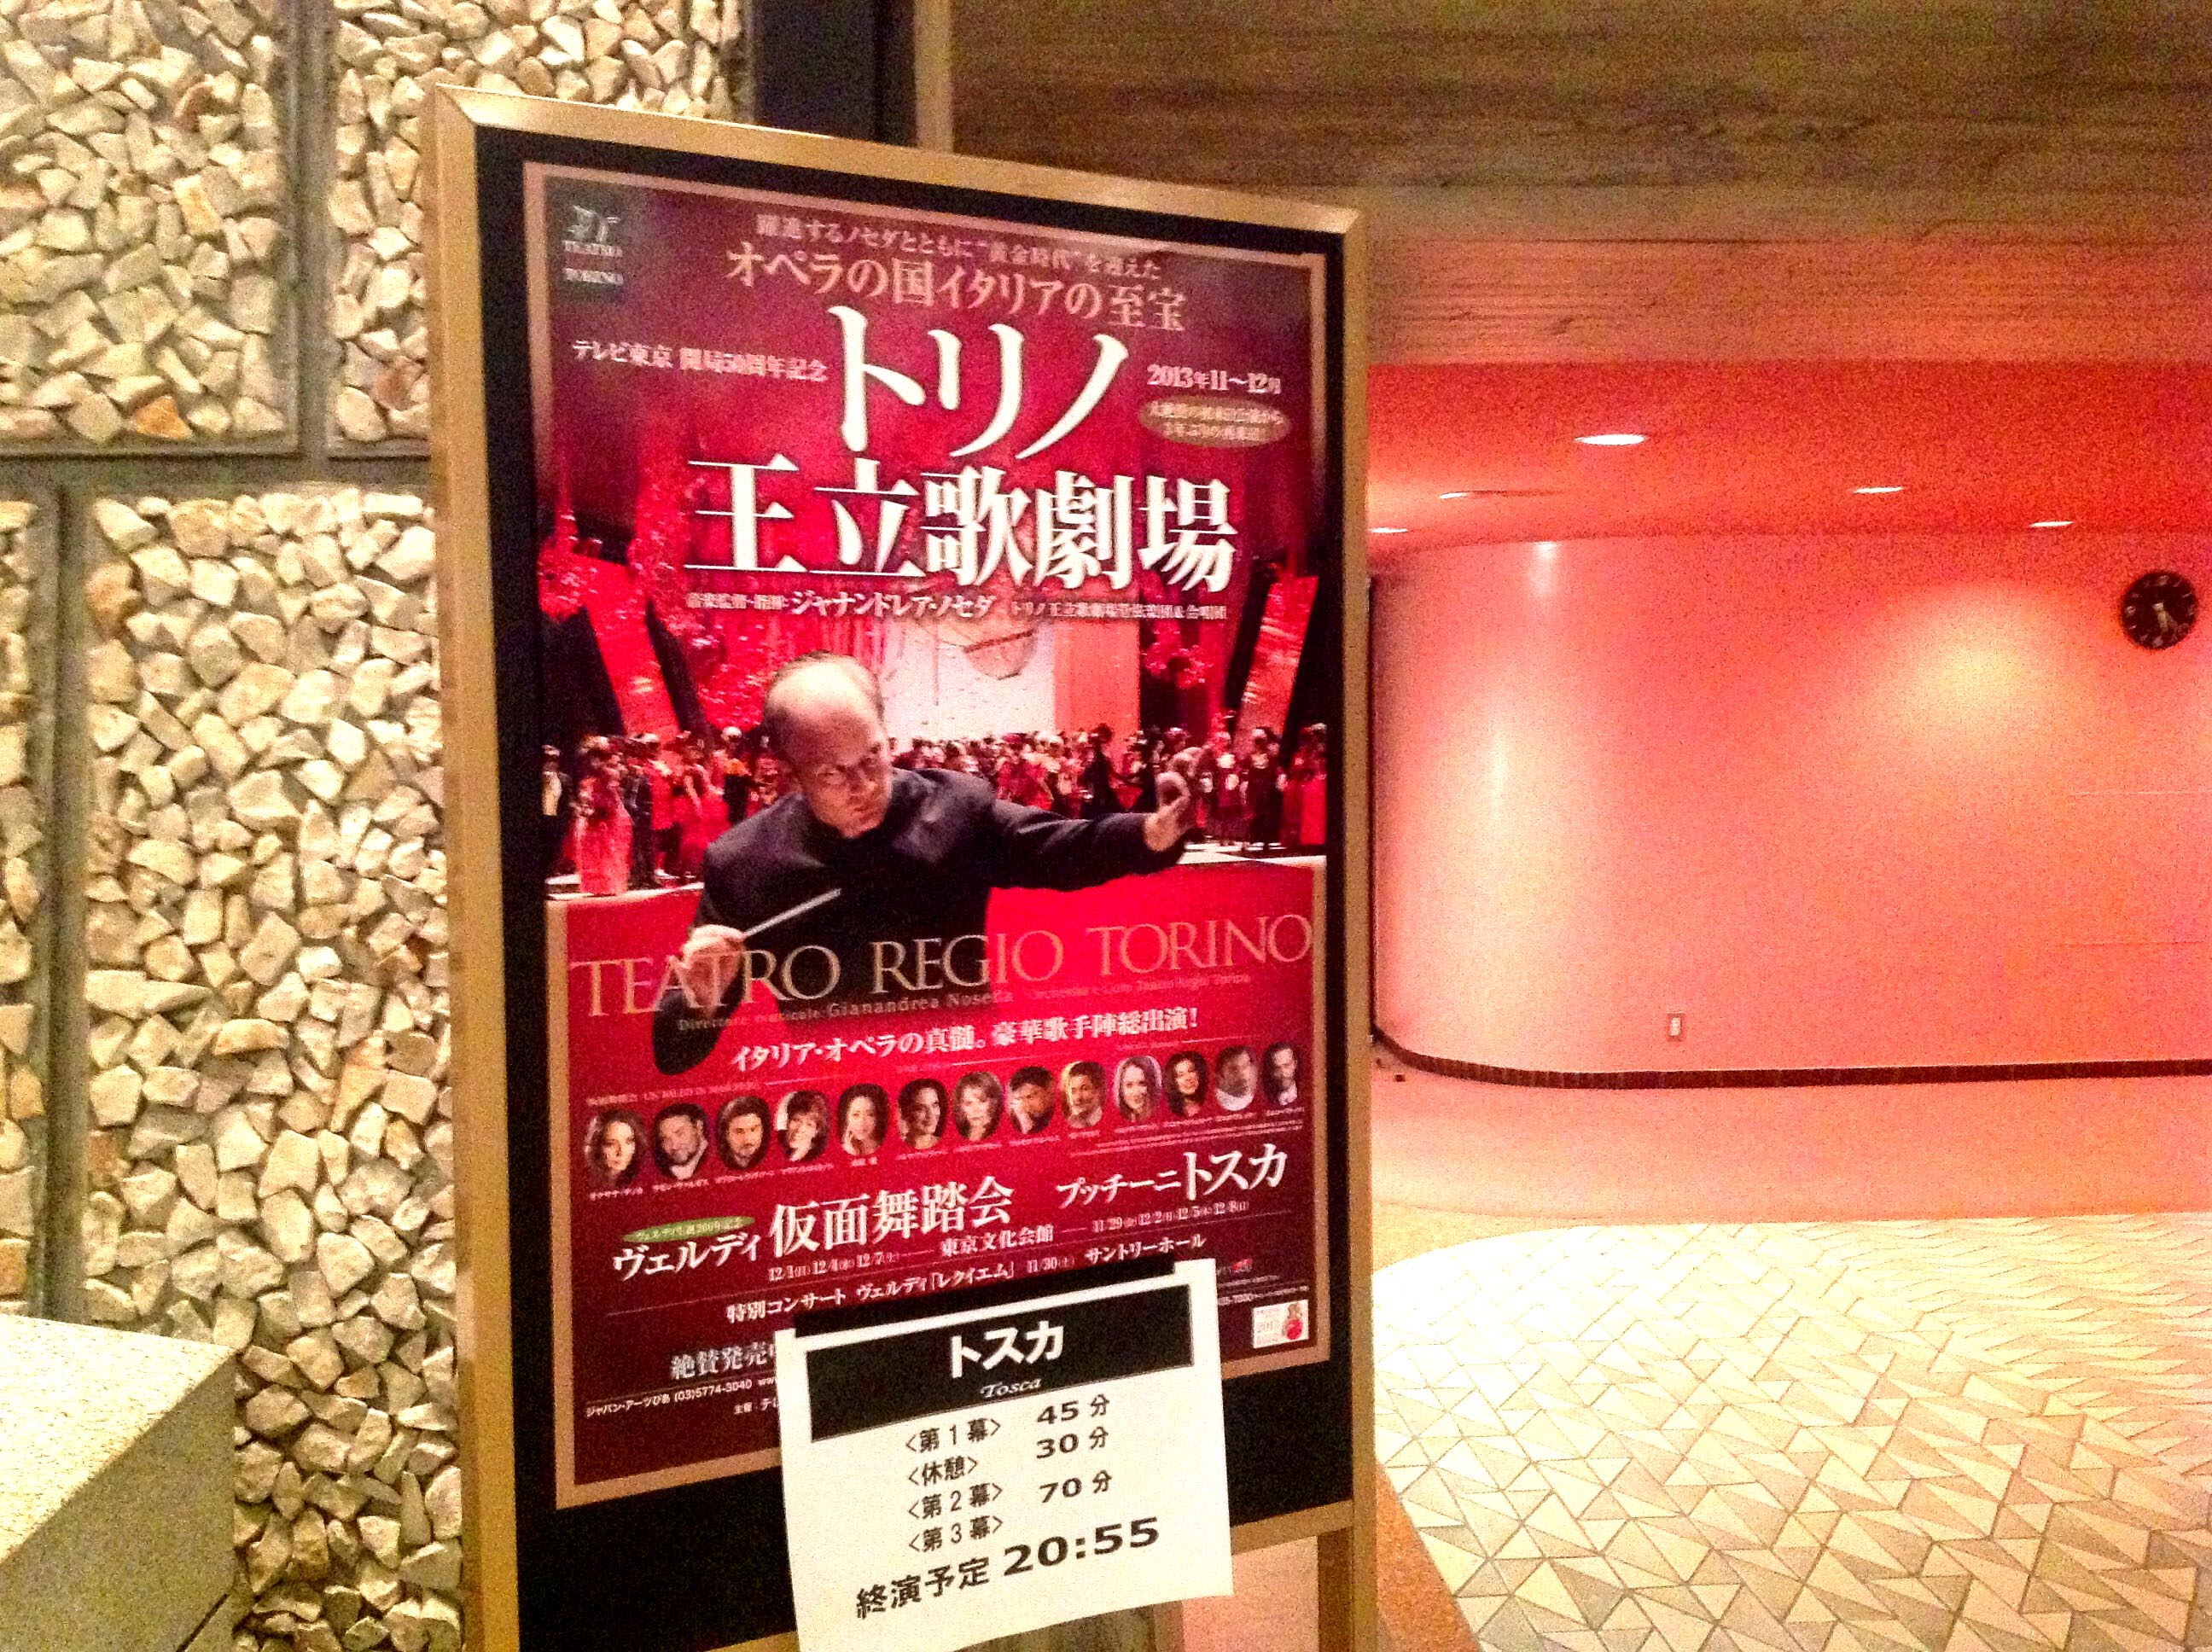 The playbill of Japan Tour affixed at the Bunka Kaikan in TOkyo